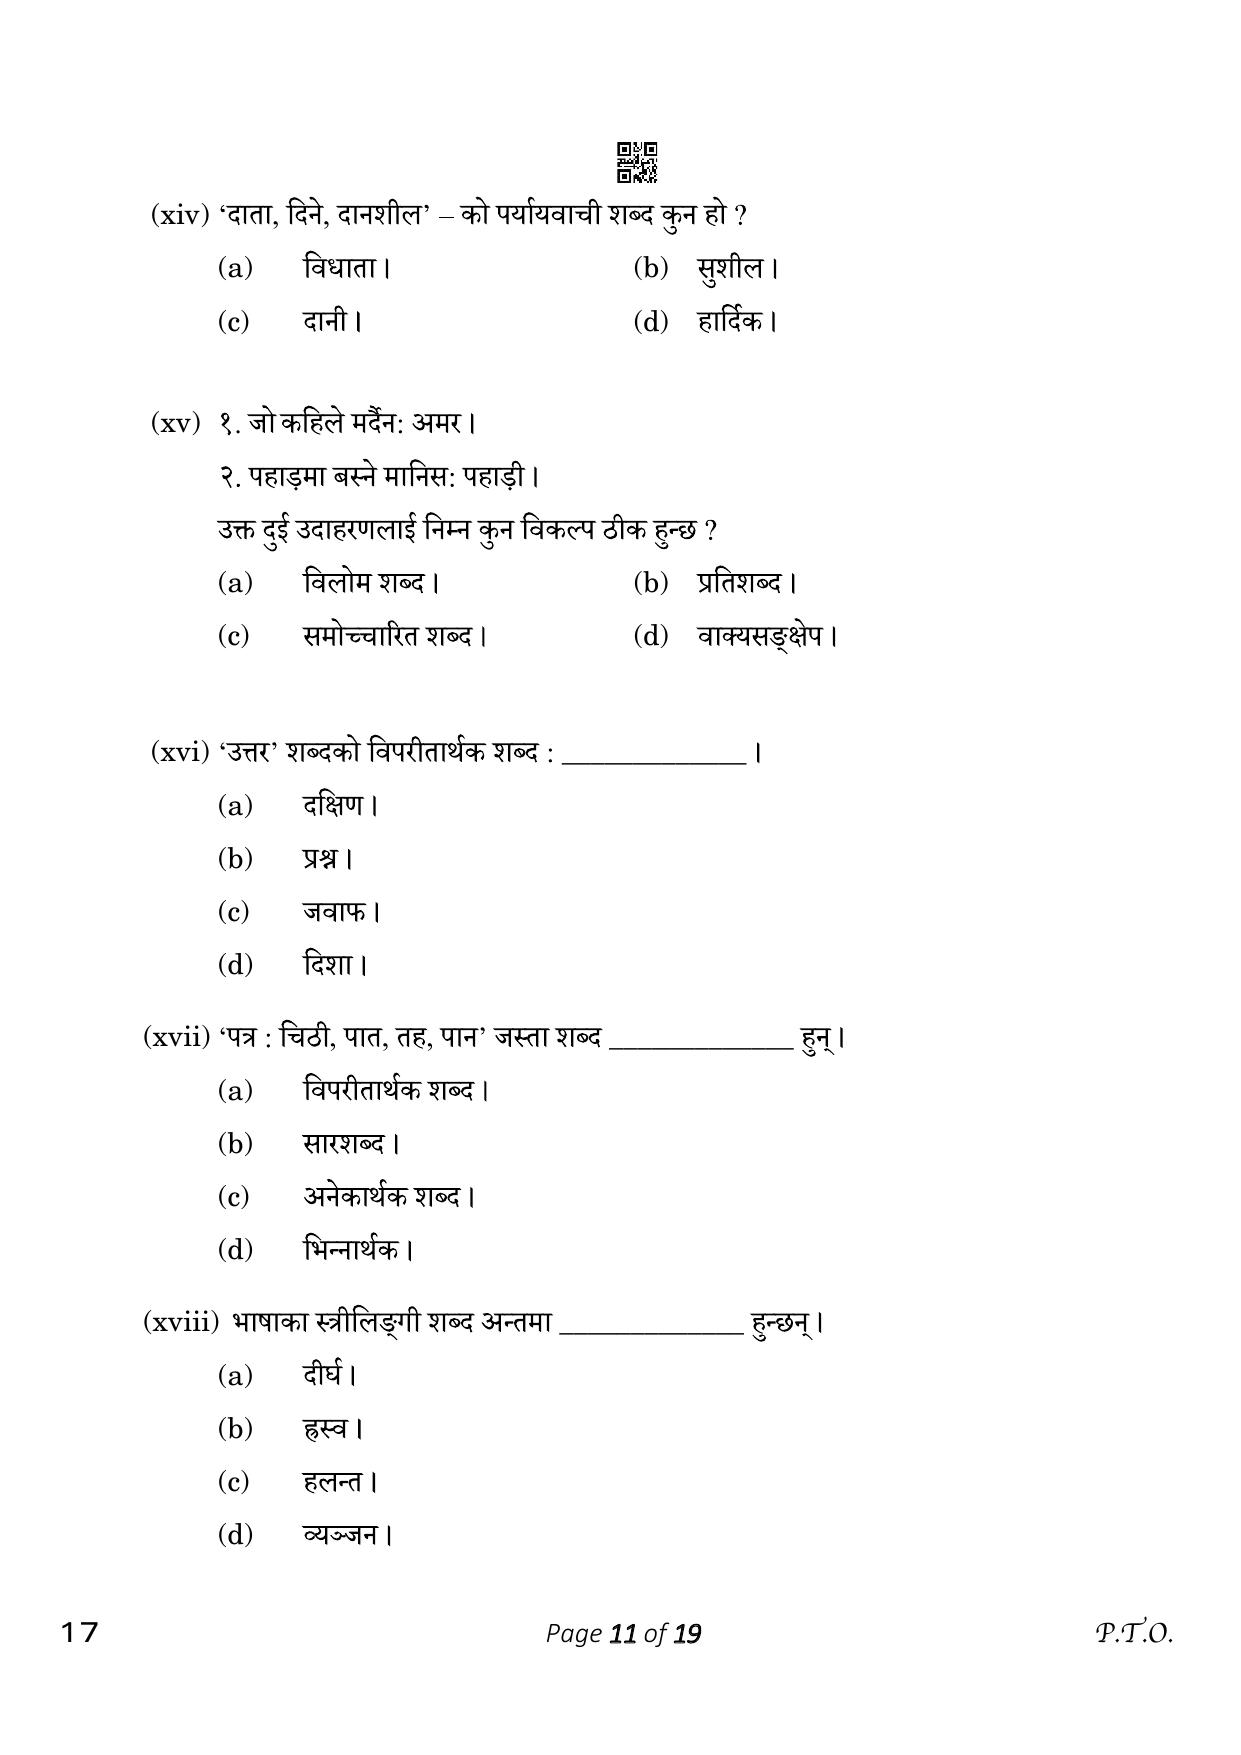 CBSE Class 10 Nepali (Compartment) 2023 Question Paper - Page 11